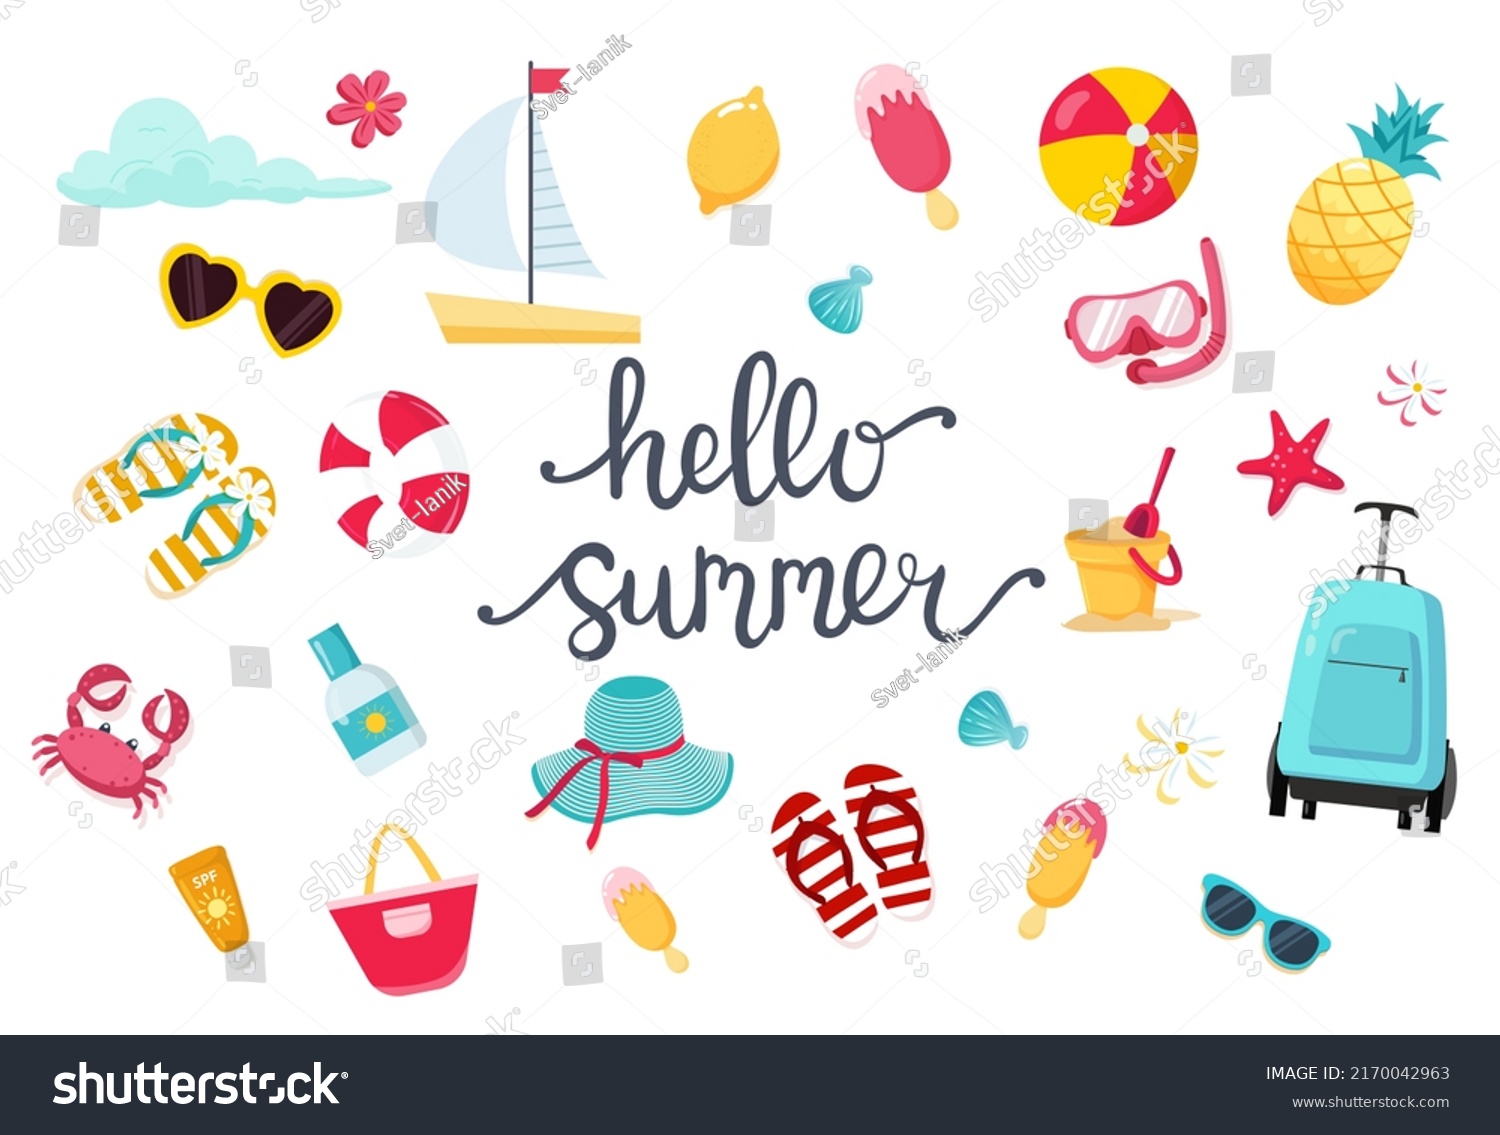 SVG of Summer set with lettering and cute beach elements flip flops, fruits, flowers, ice creams. Flat cartoon elements. Vector illustration svg